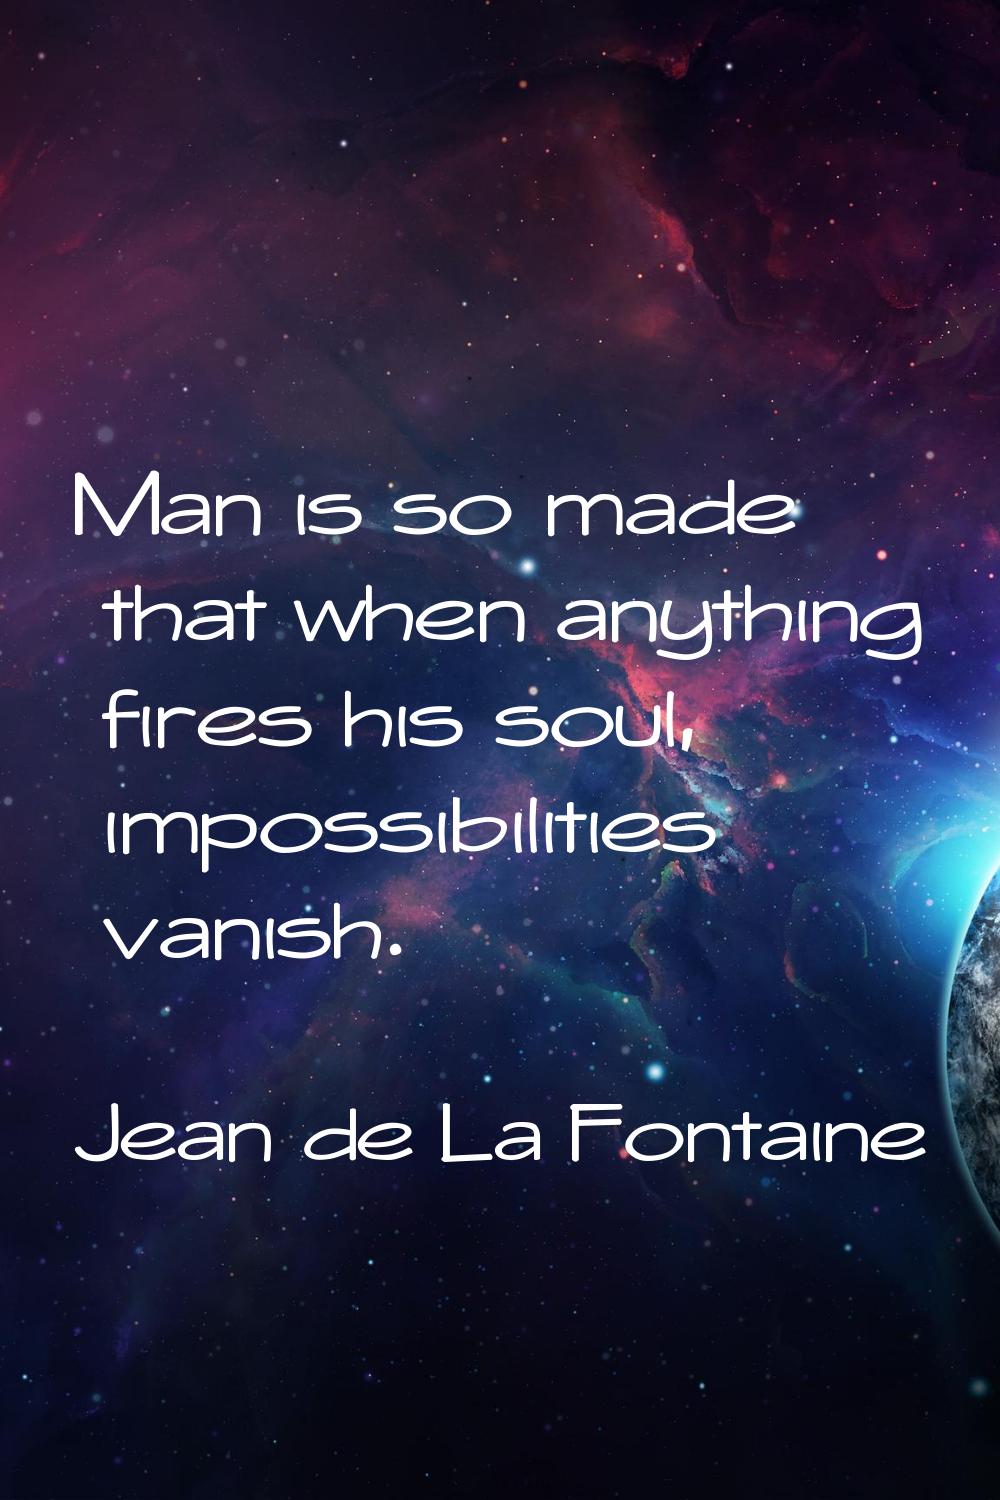 Man is so made that when anything fires his soul, impossibilities vanish.